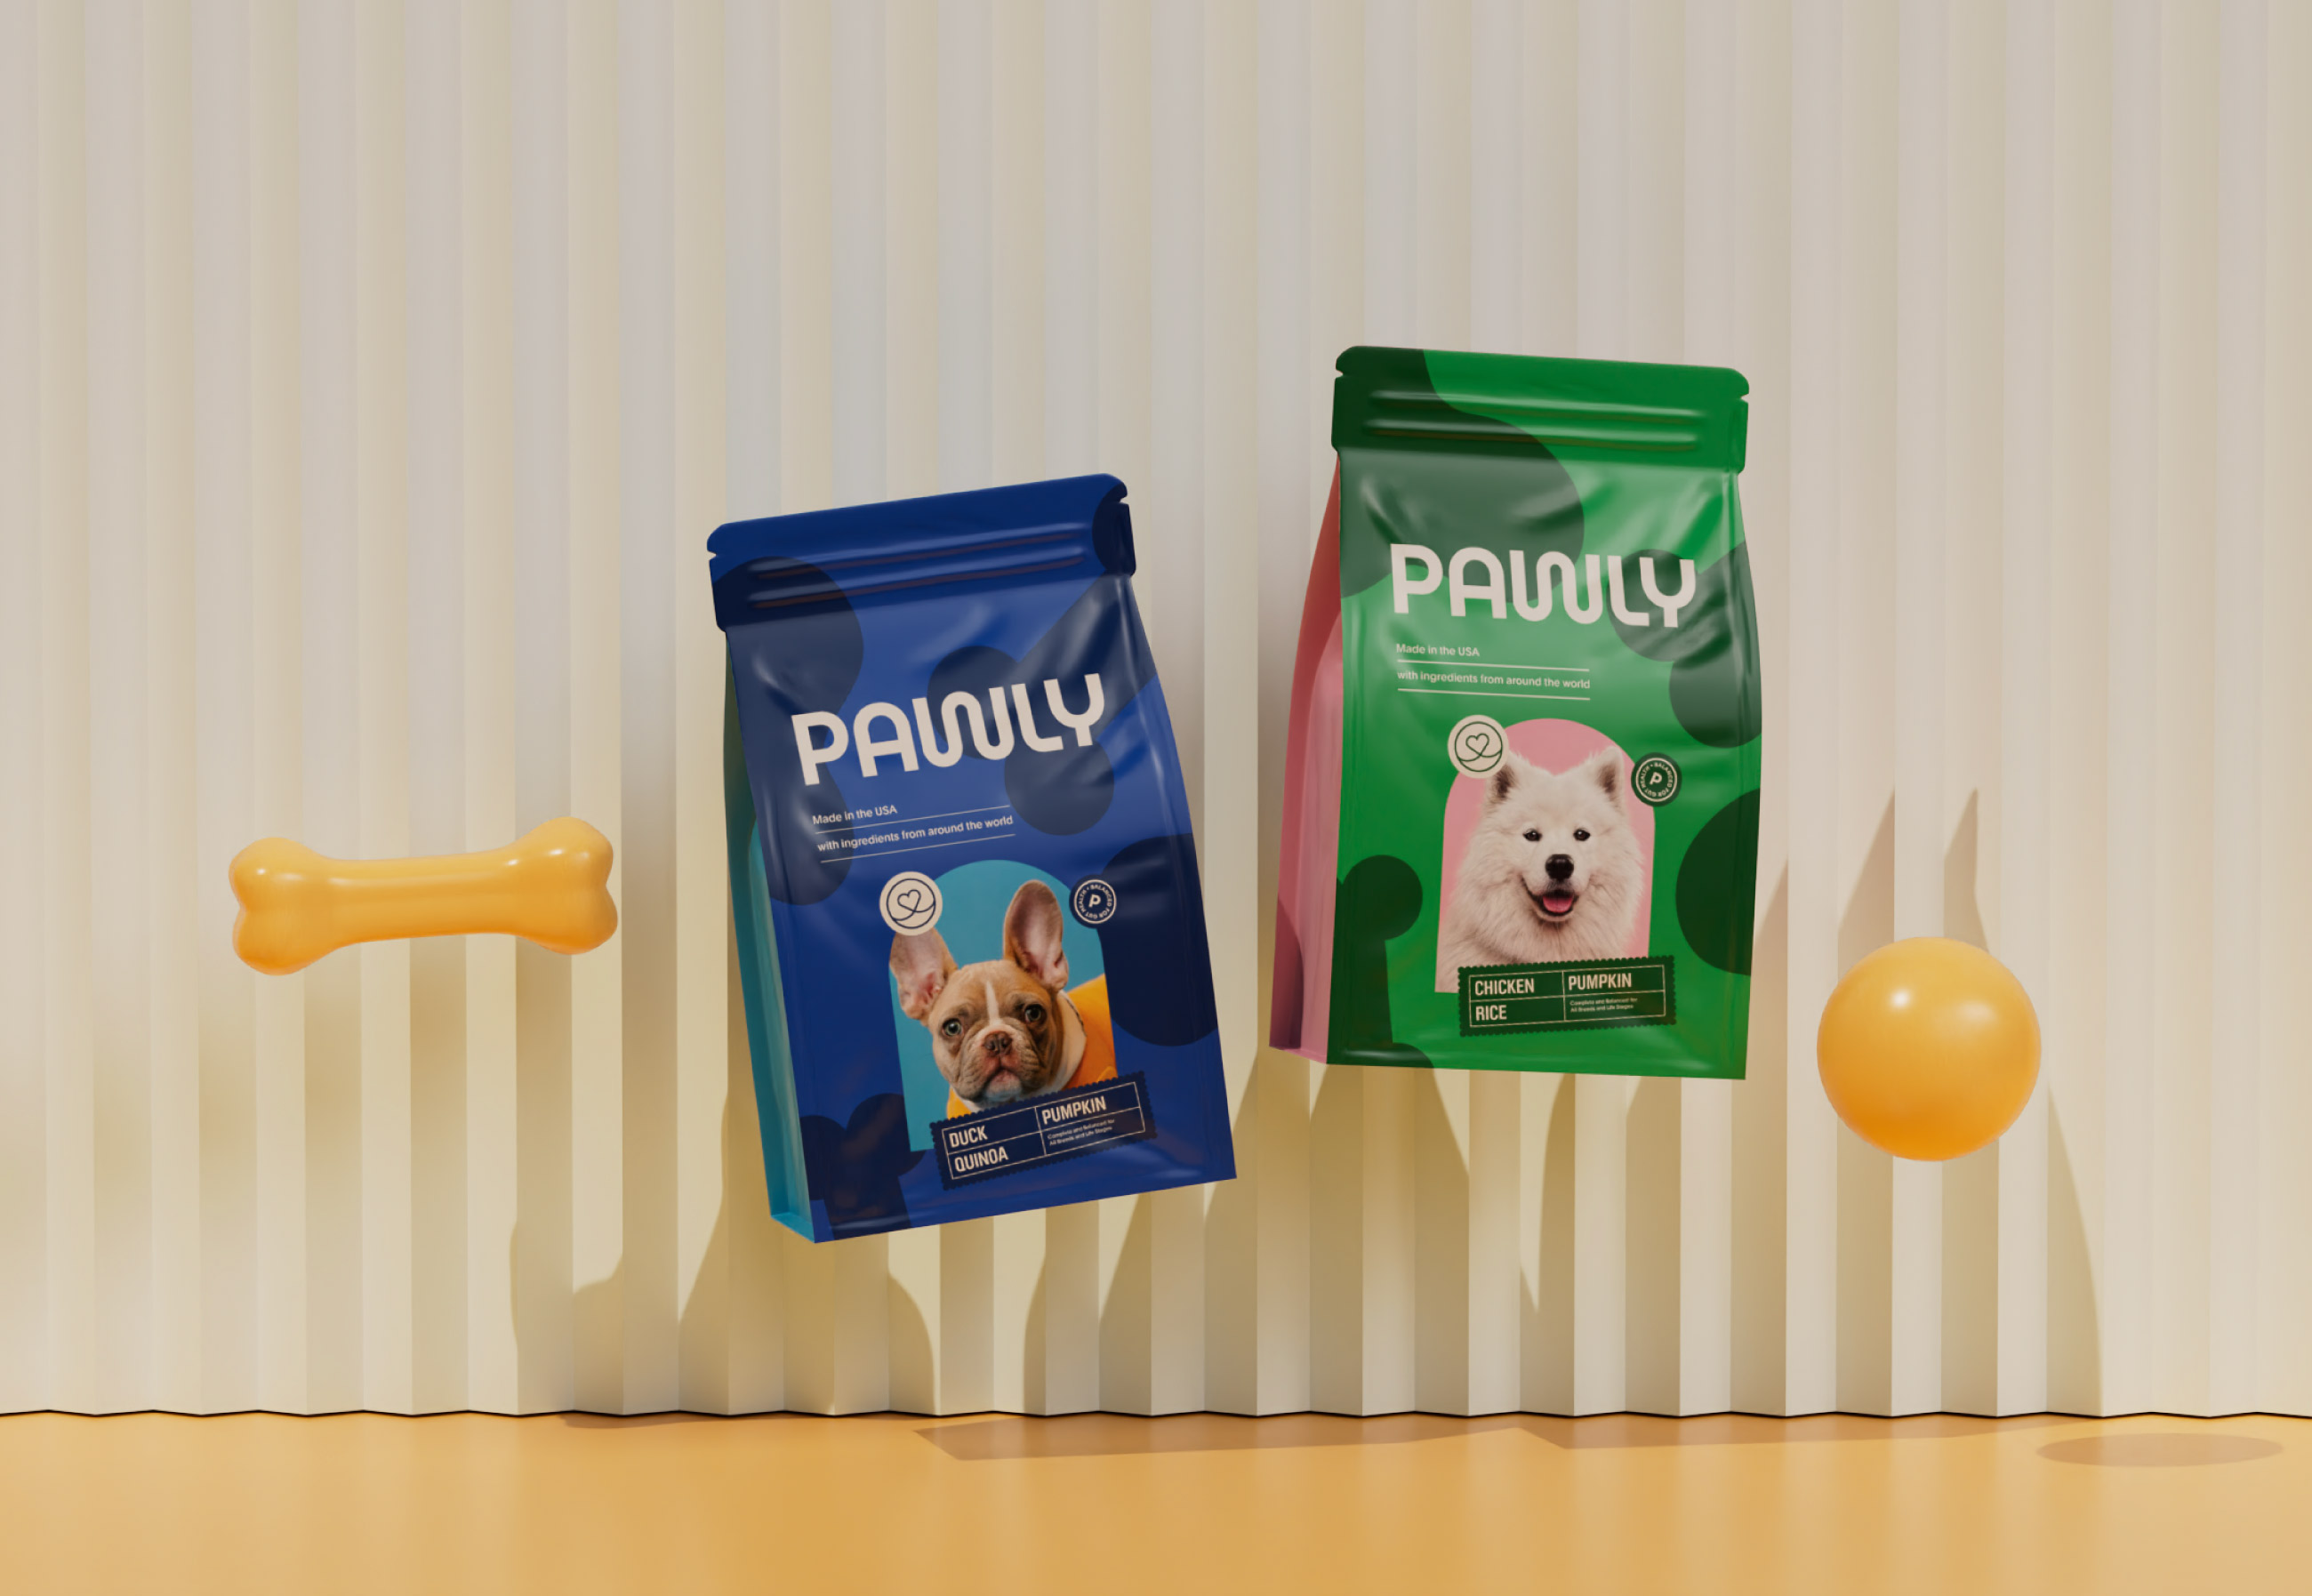 Branding for Pawly Dog Food